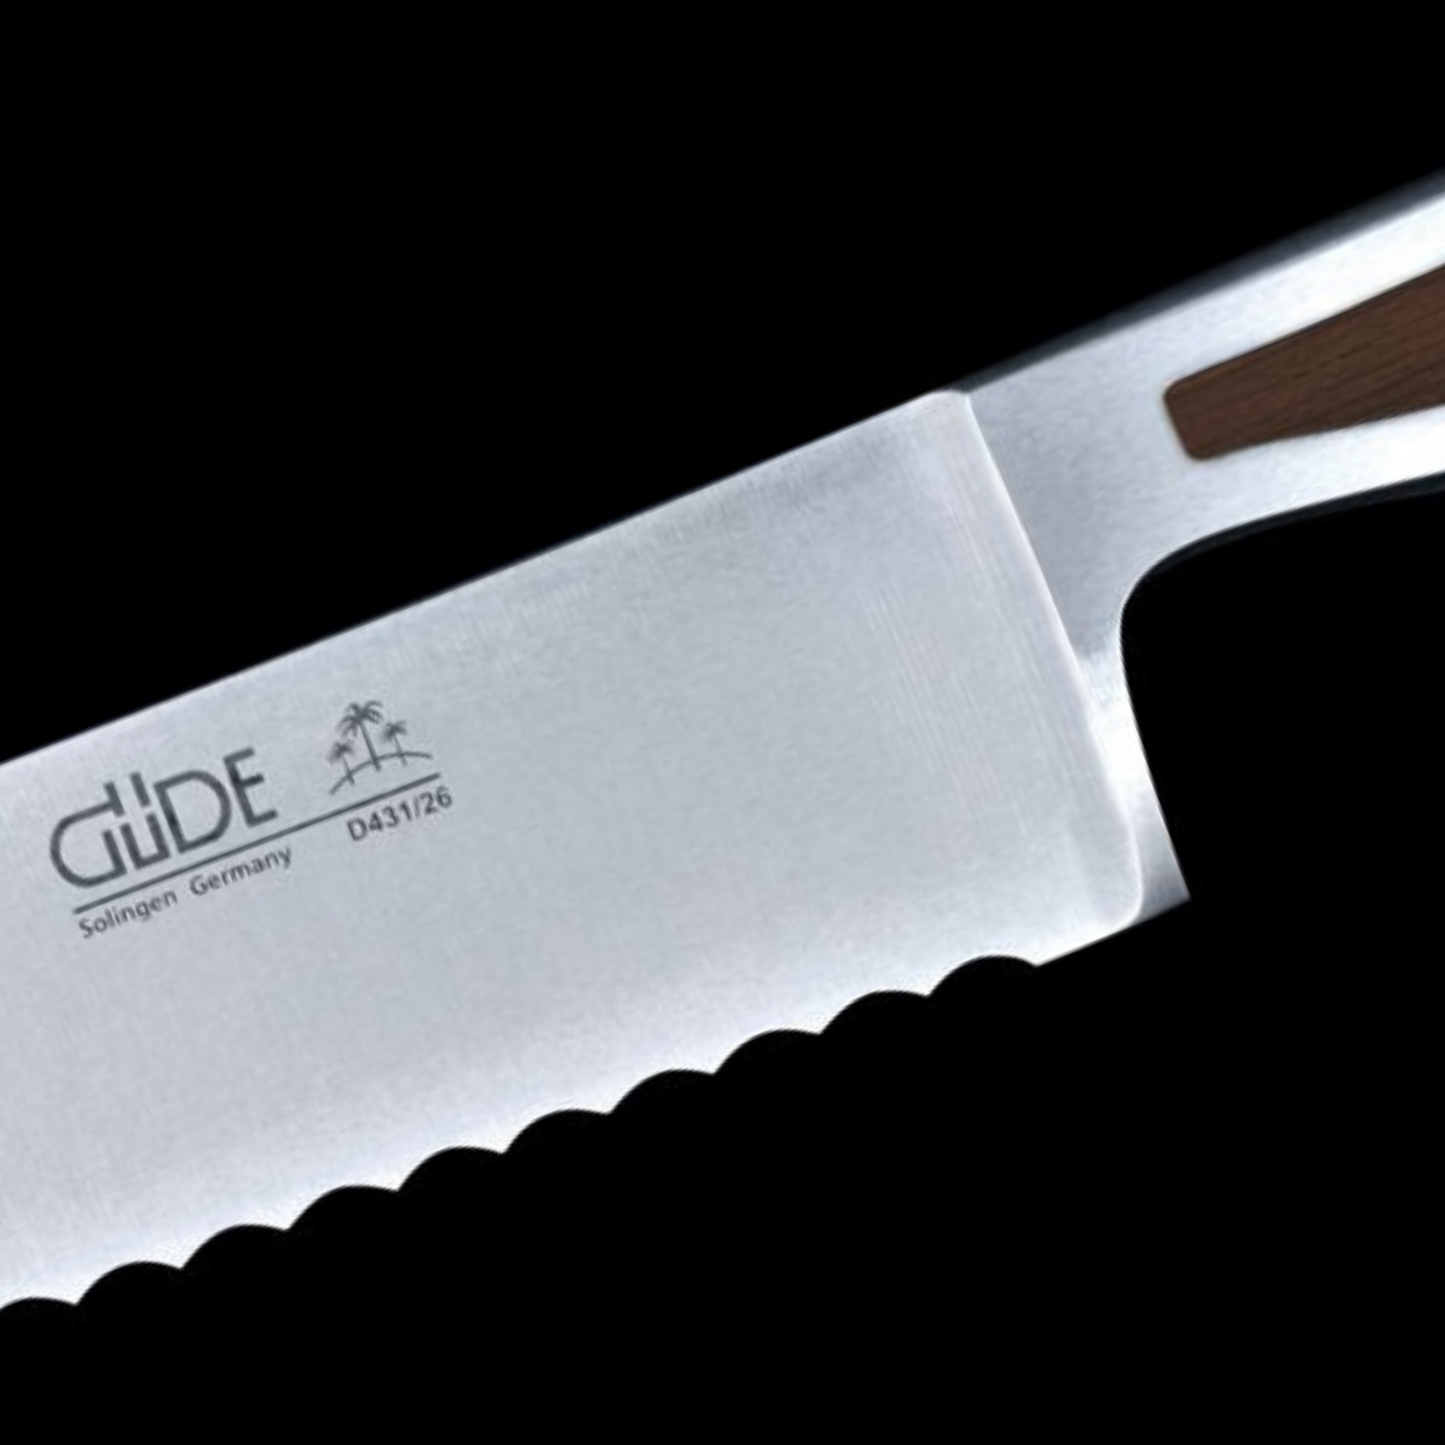 Gude Delta Series Forged Double Bolster Bread Knife 10", African Black Wood Handle and Serrated Blade - GuedeUSA